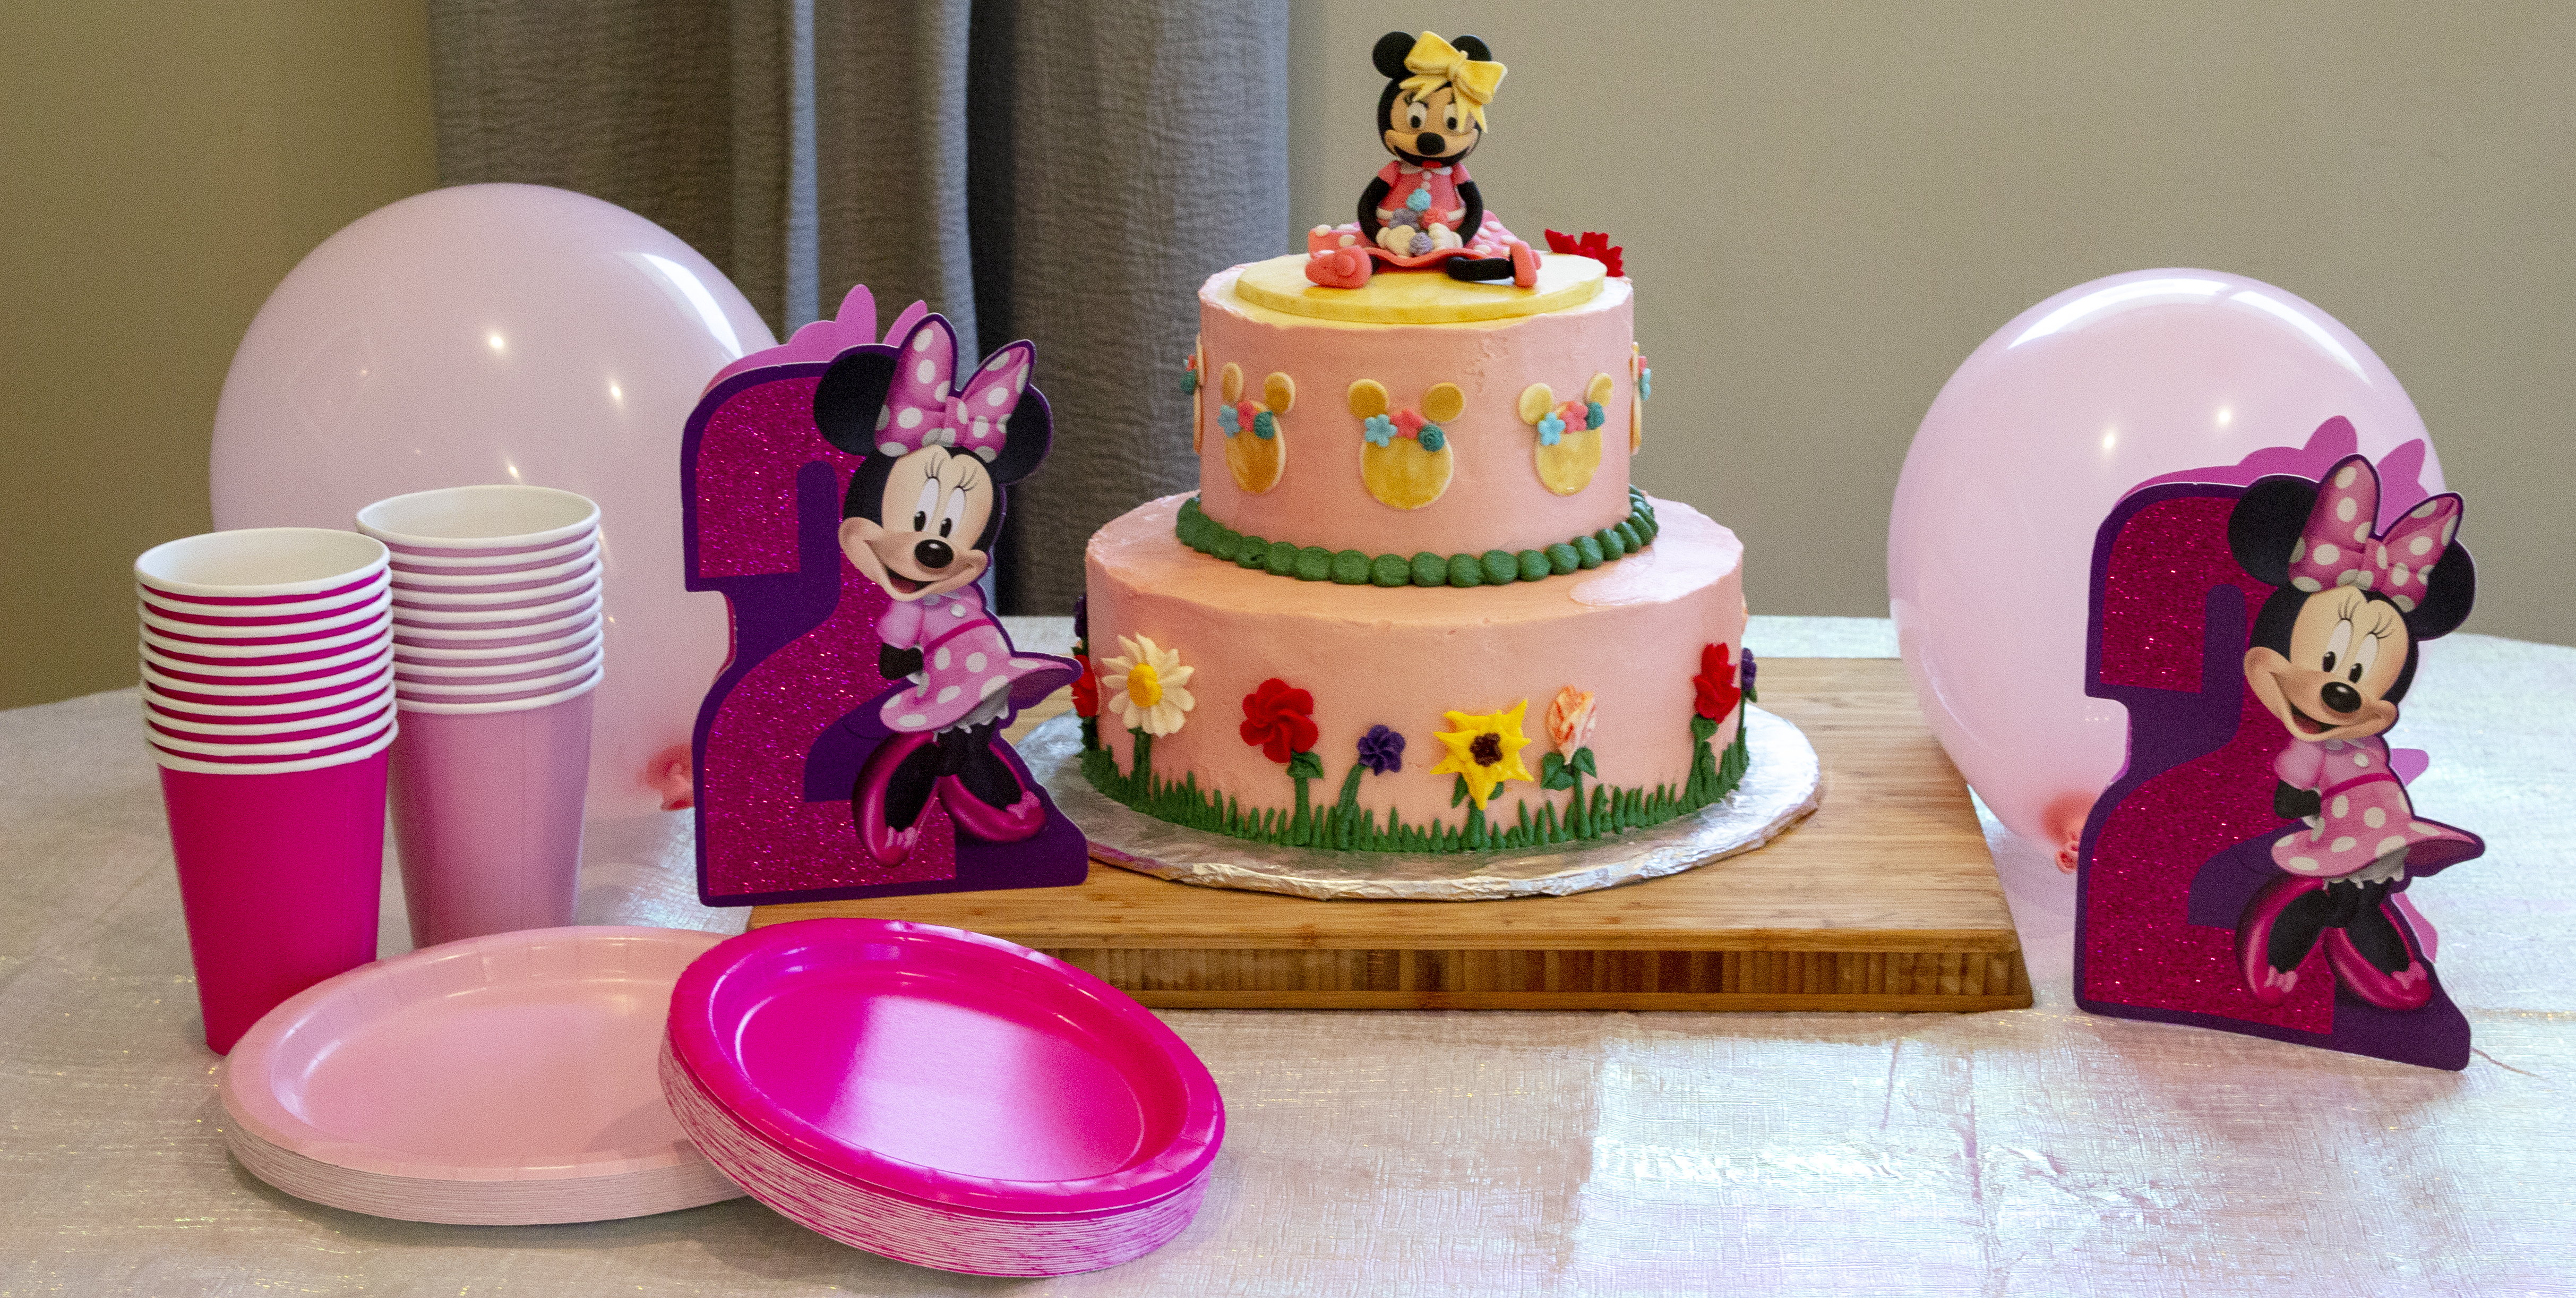 Minnie Mouse Birthday Table set up with minnie birthday cake